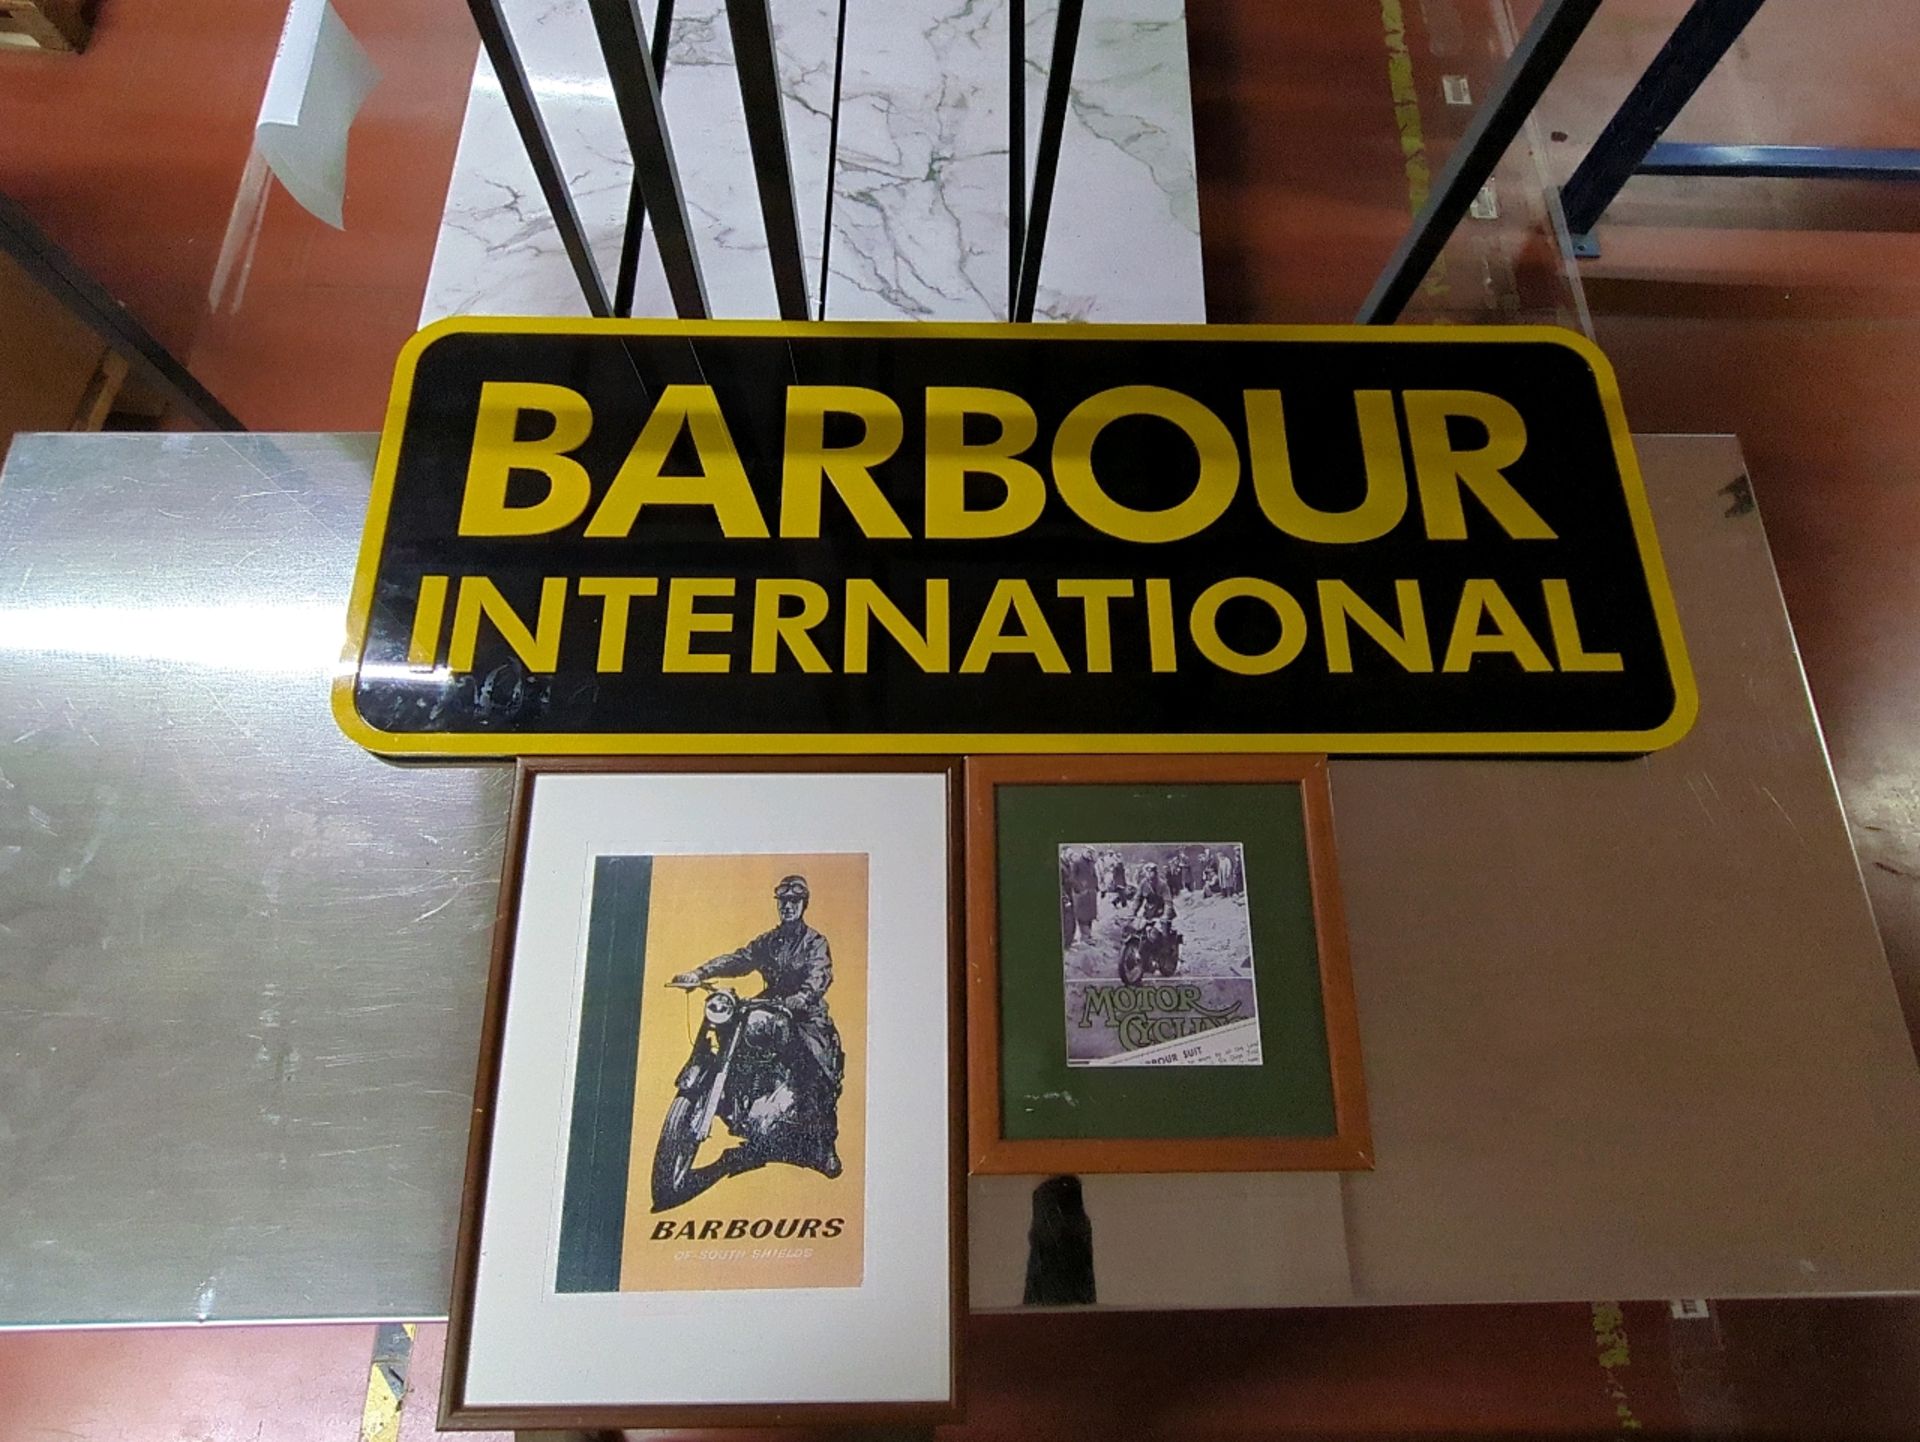 Barbour Branded items